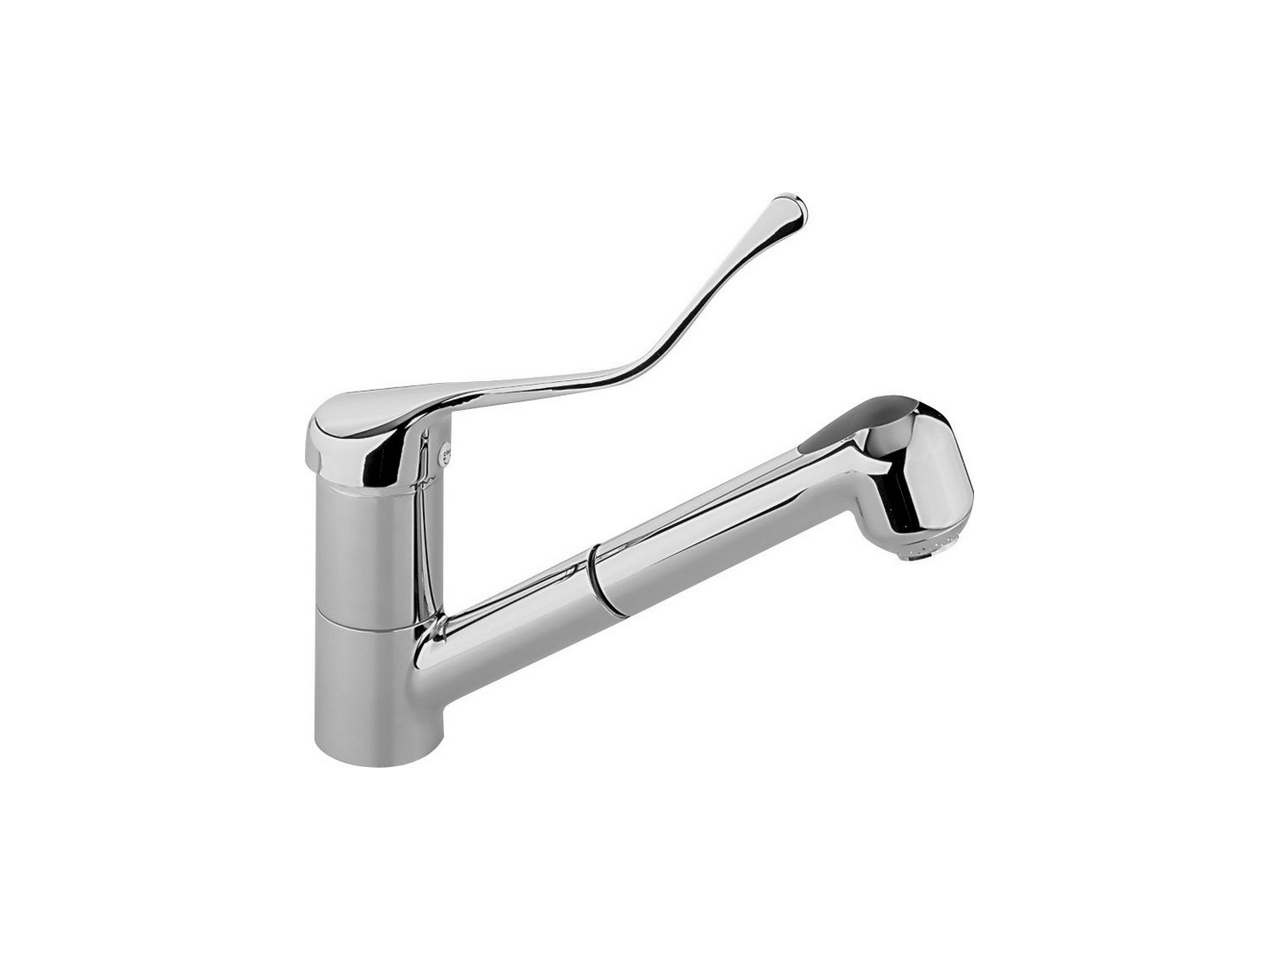 CisalSingle lever sink mixer with pull out handspray CLINIC_EL002570